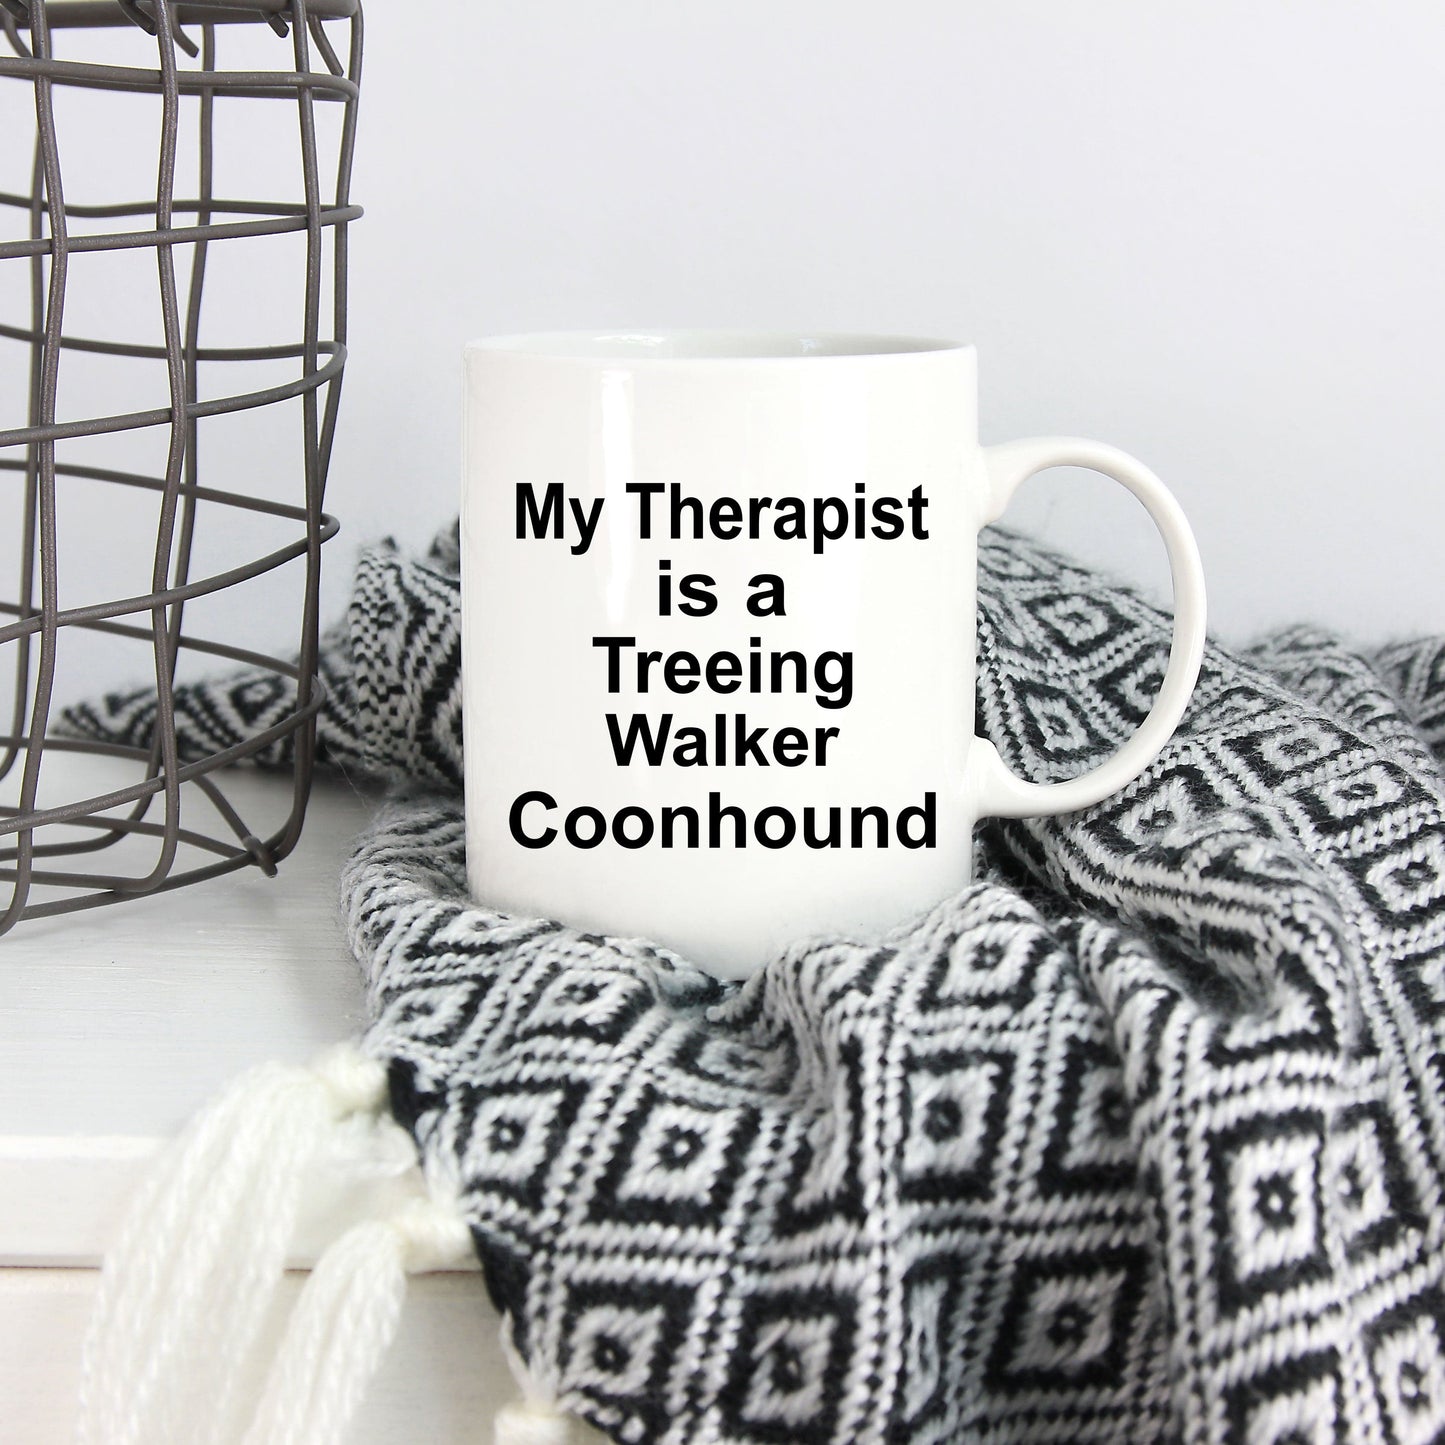 Treeing Walker Coonhound Dog Owner Lover Funny Gift Therapist White Ceramic Coffee Mug